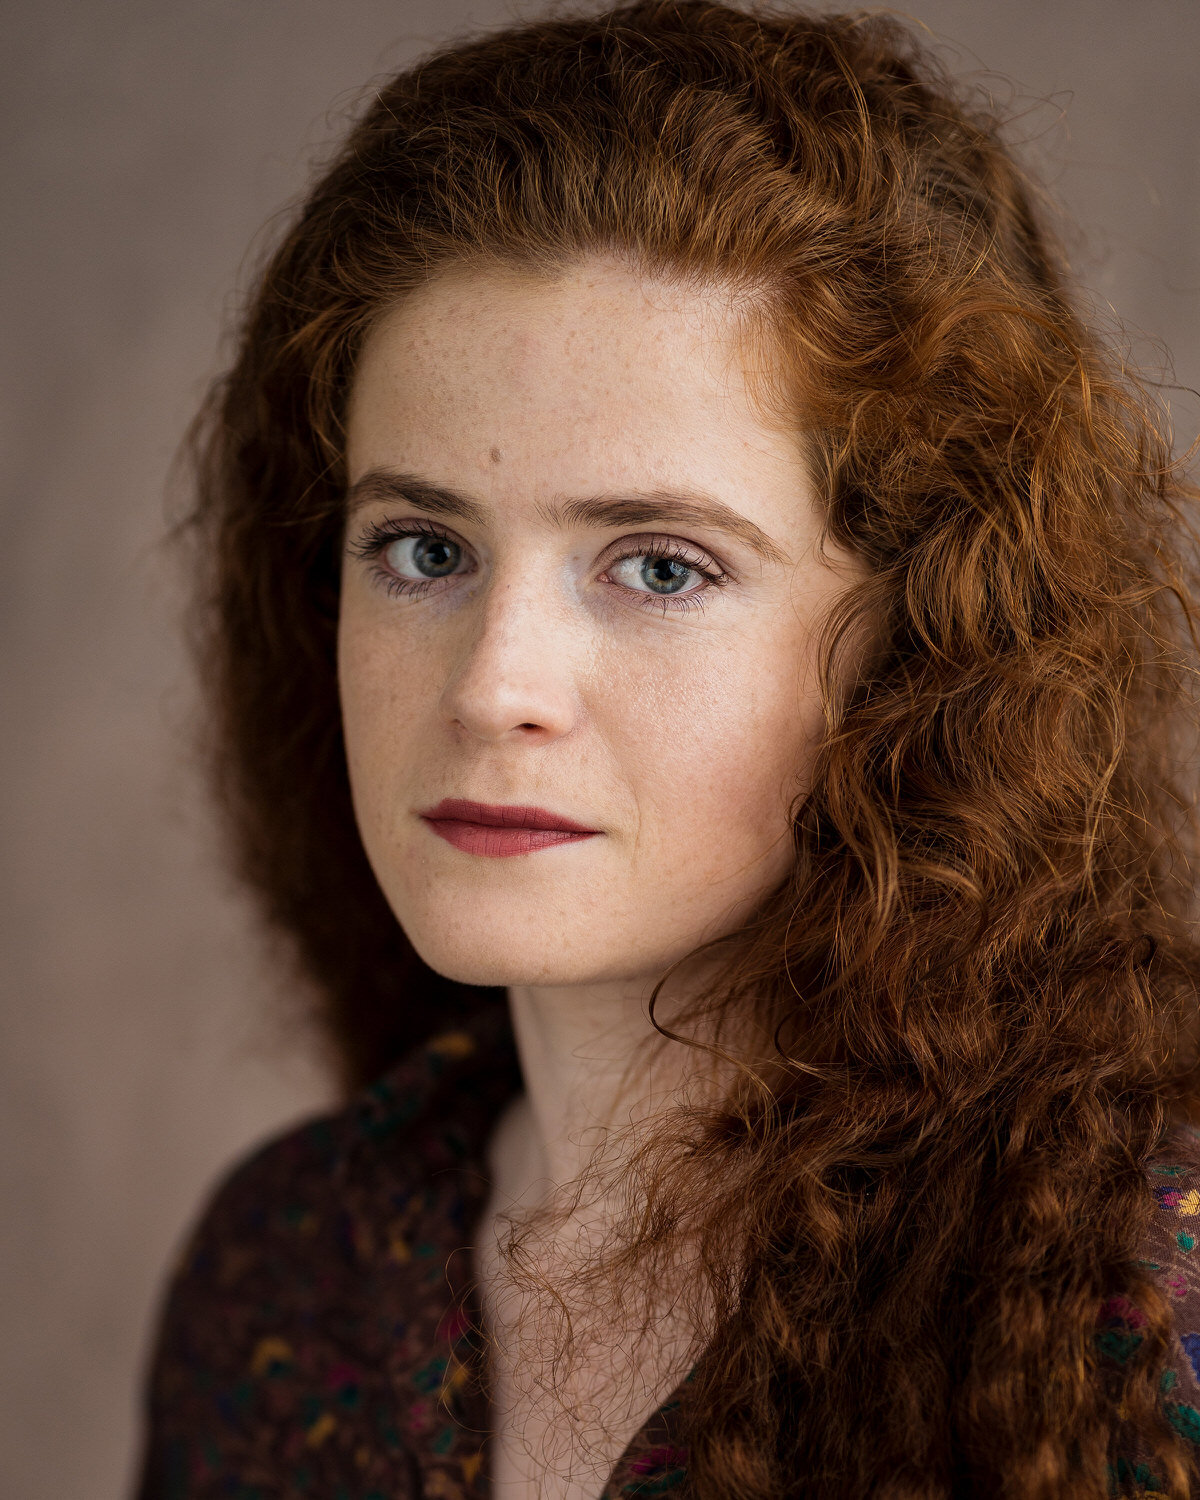  Actor headshot of Aoife Phealan by photographer Roger Kenny. 